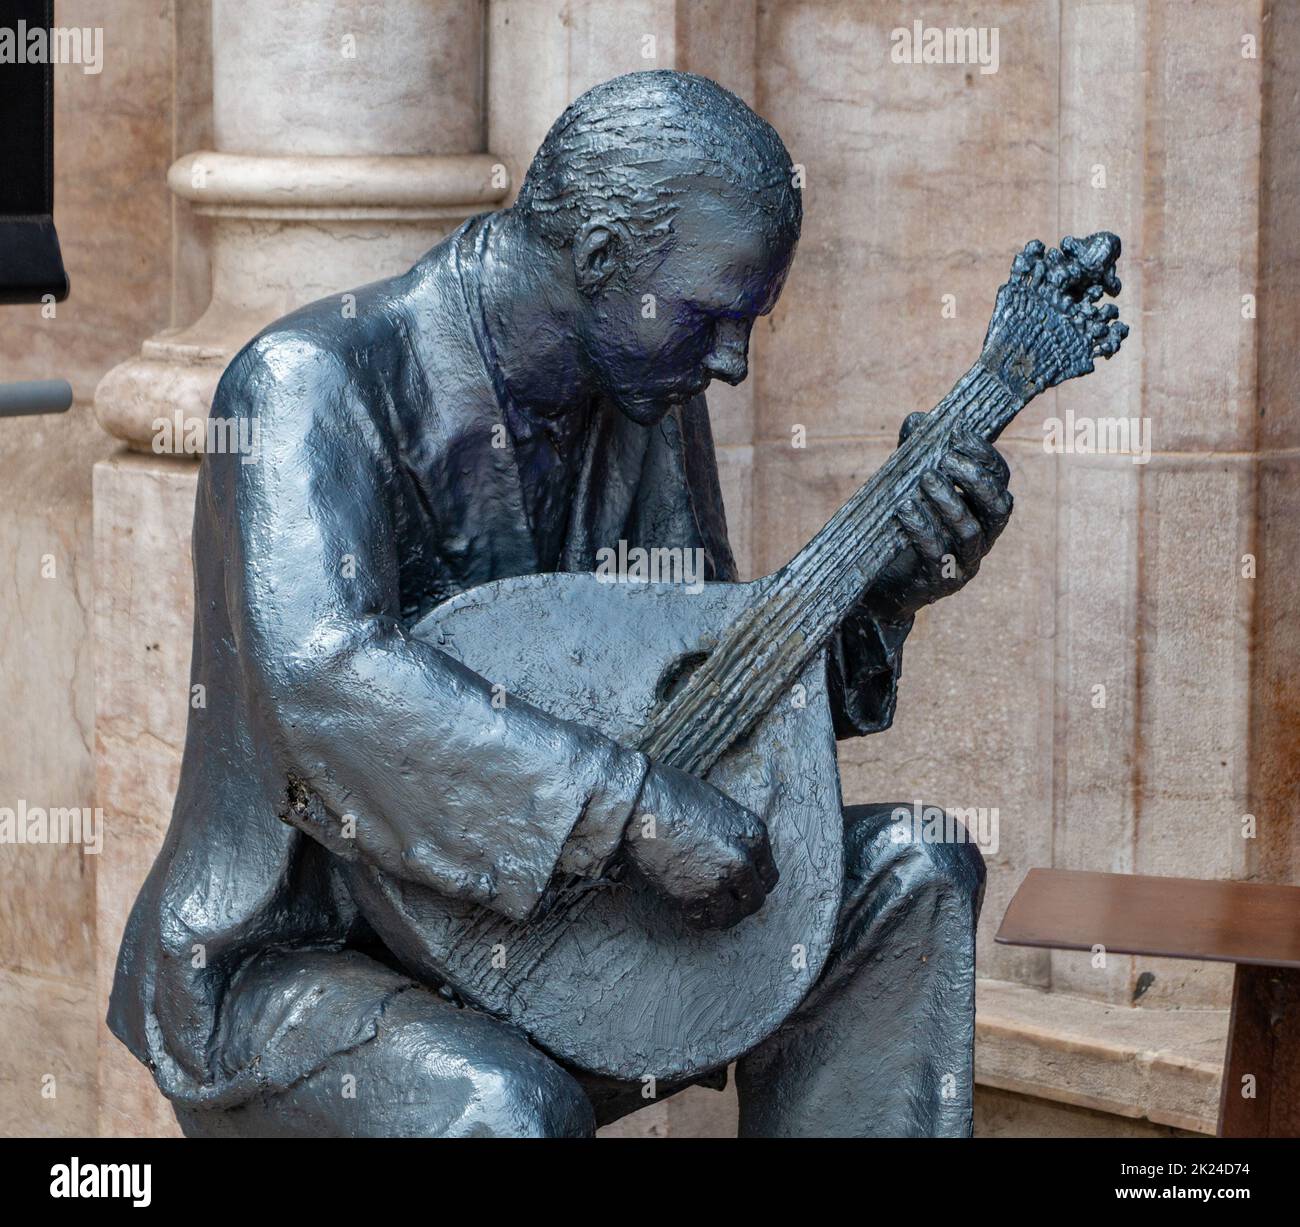 A picture of a sculpture showing a Portuguese guitar player, representing the Fado music genre, traditional of Portugal (Lisbon). Stock Photo